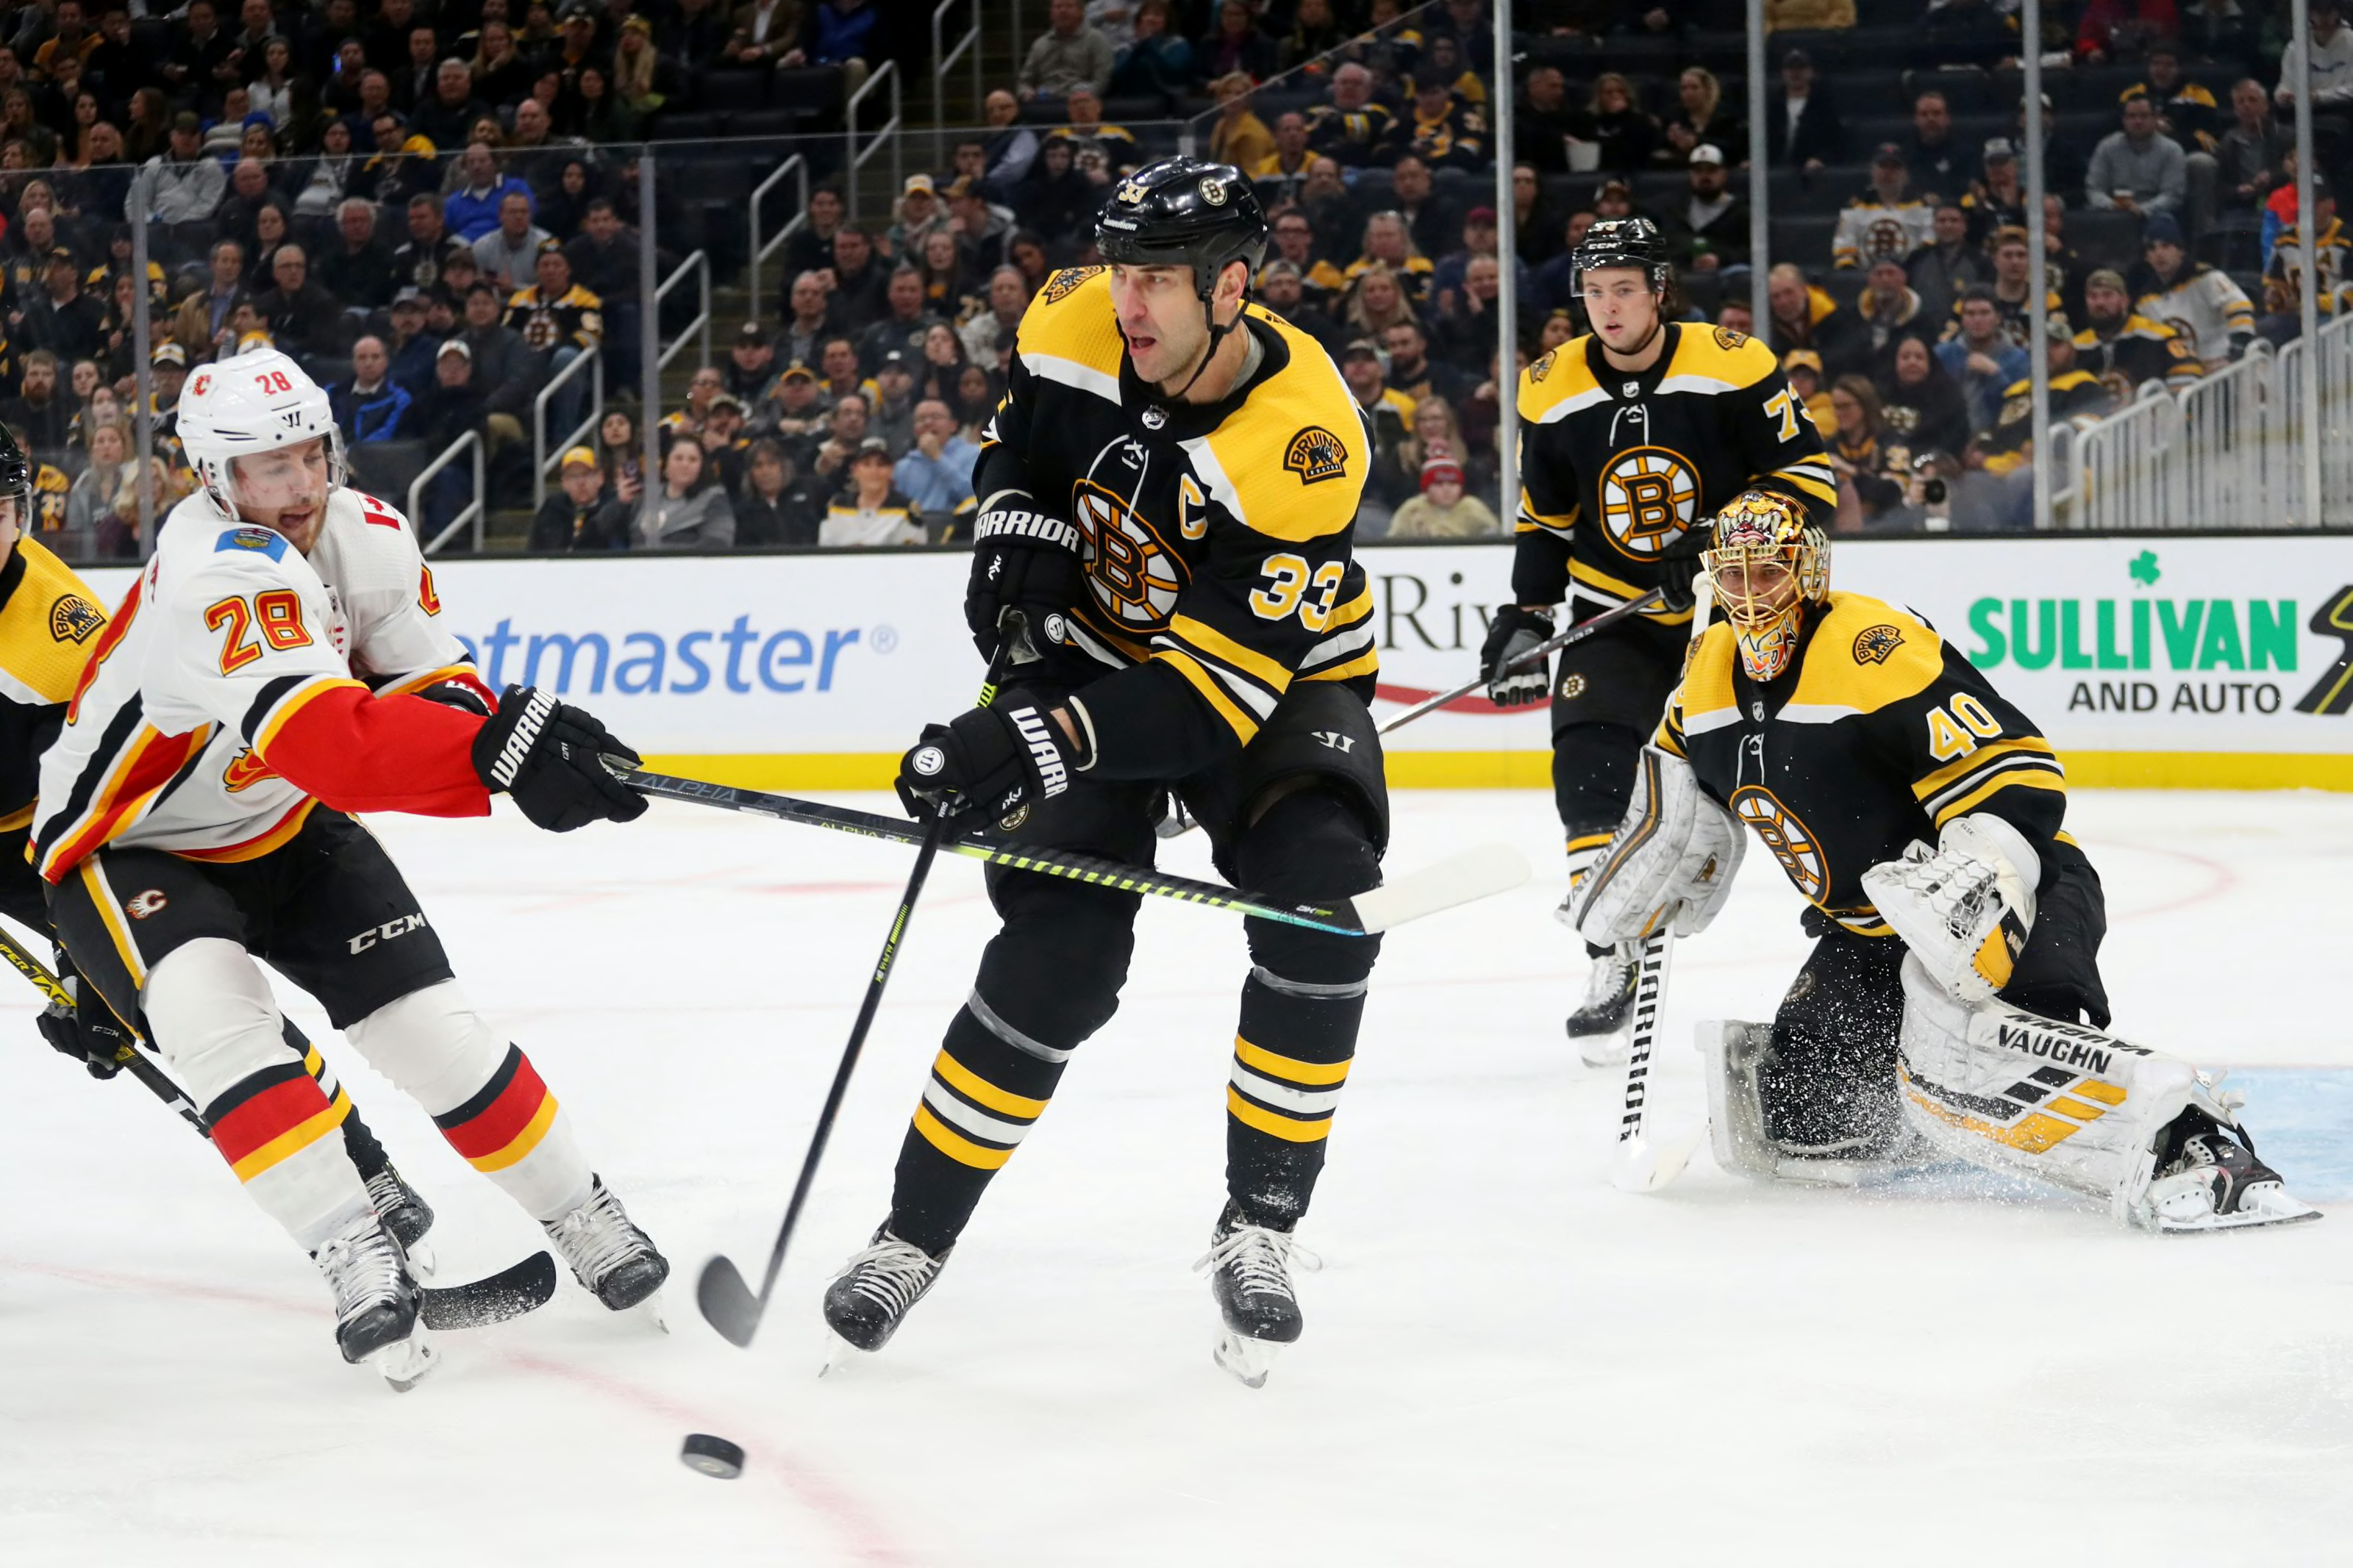 One final year for Zdeno Chara and the Boston Bruins makes perfect 